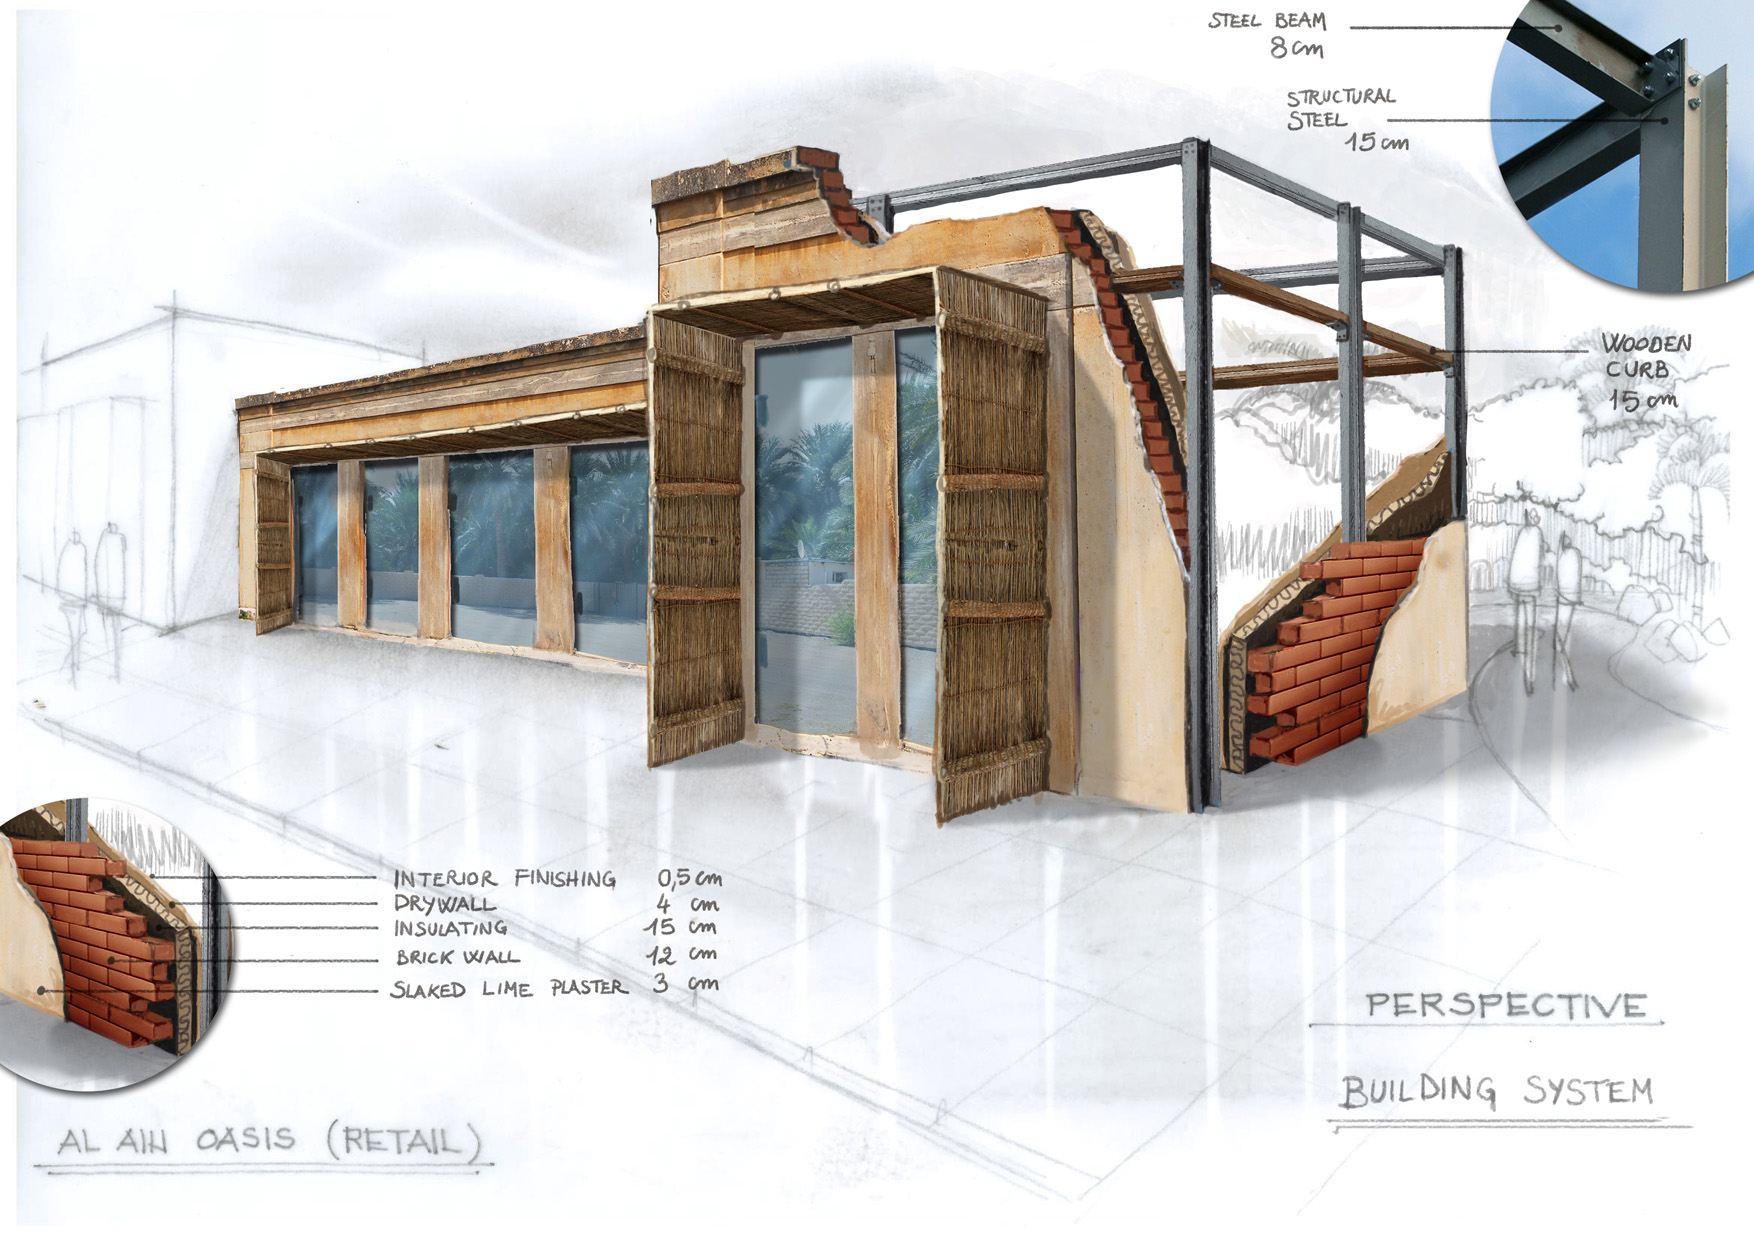 Al Ain Oasis - Concept sketches for retail and F&B (details)